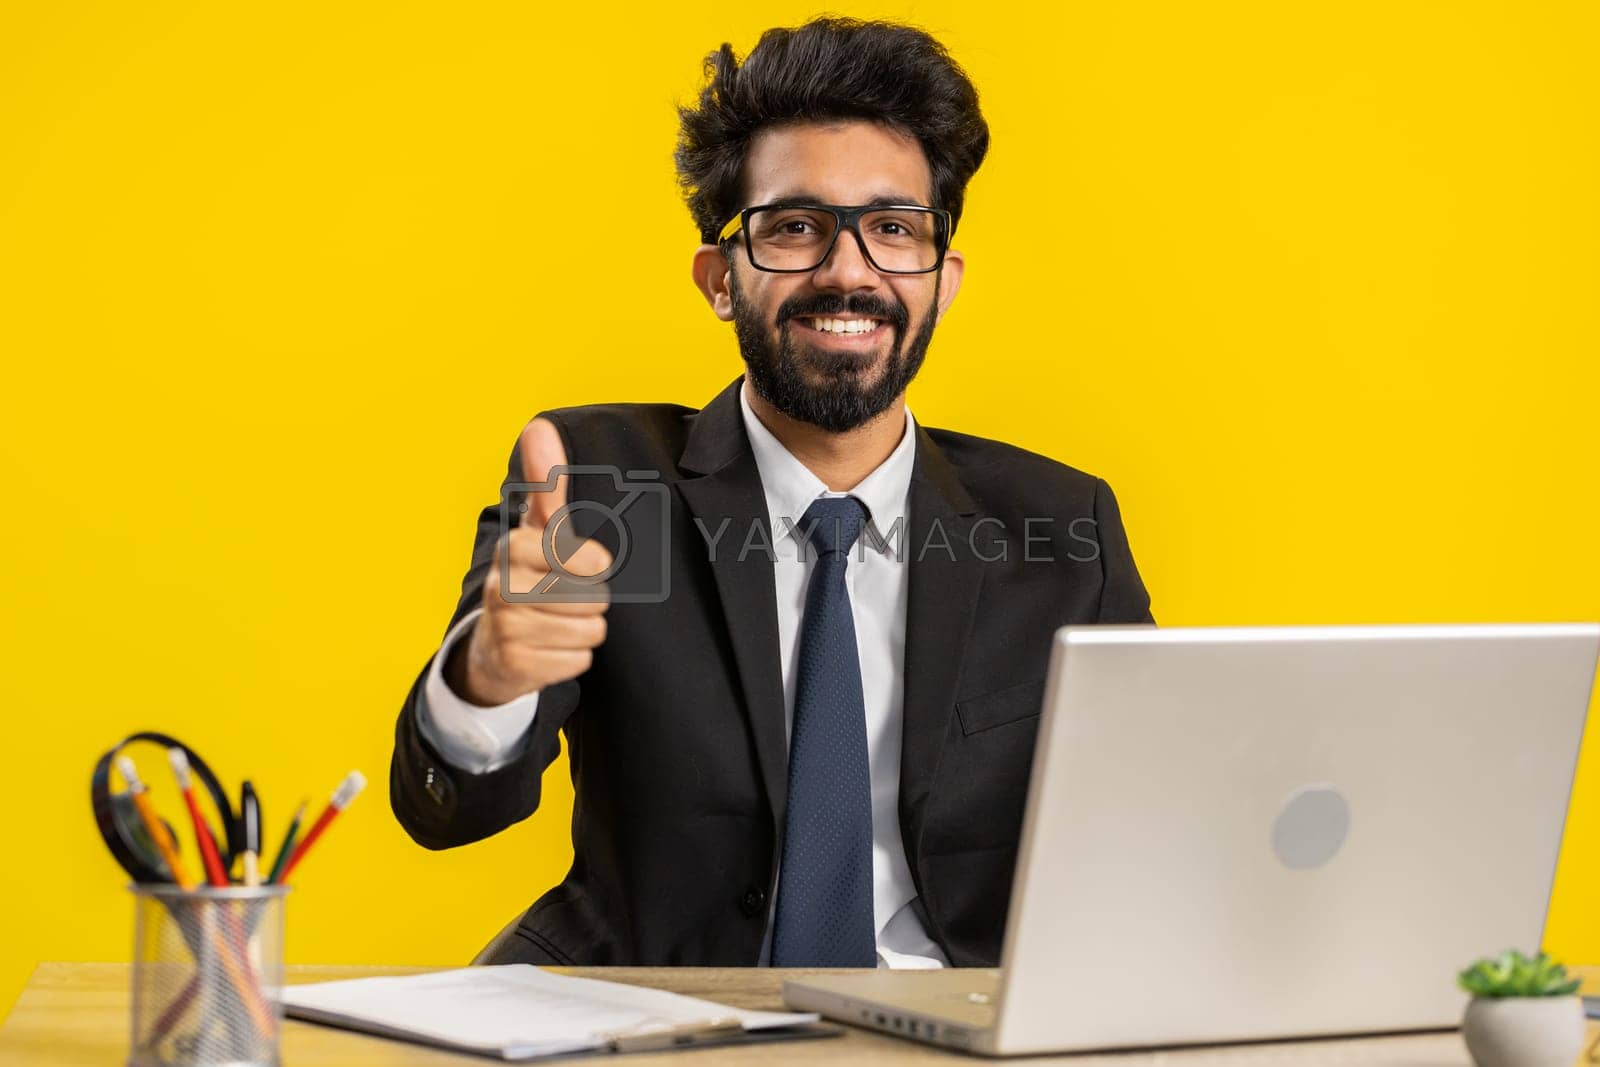 Royalty free image of Happy business man looking approvingly at camera showing thumbs up, like positive sign, good news by efuror